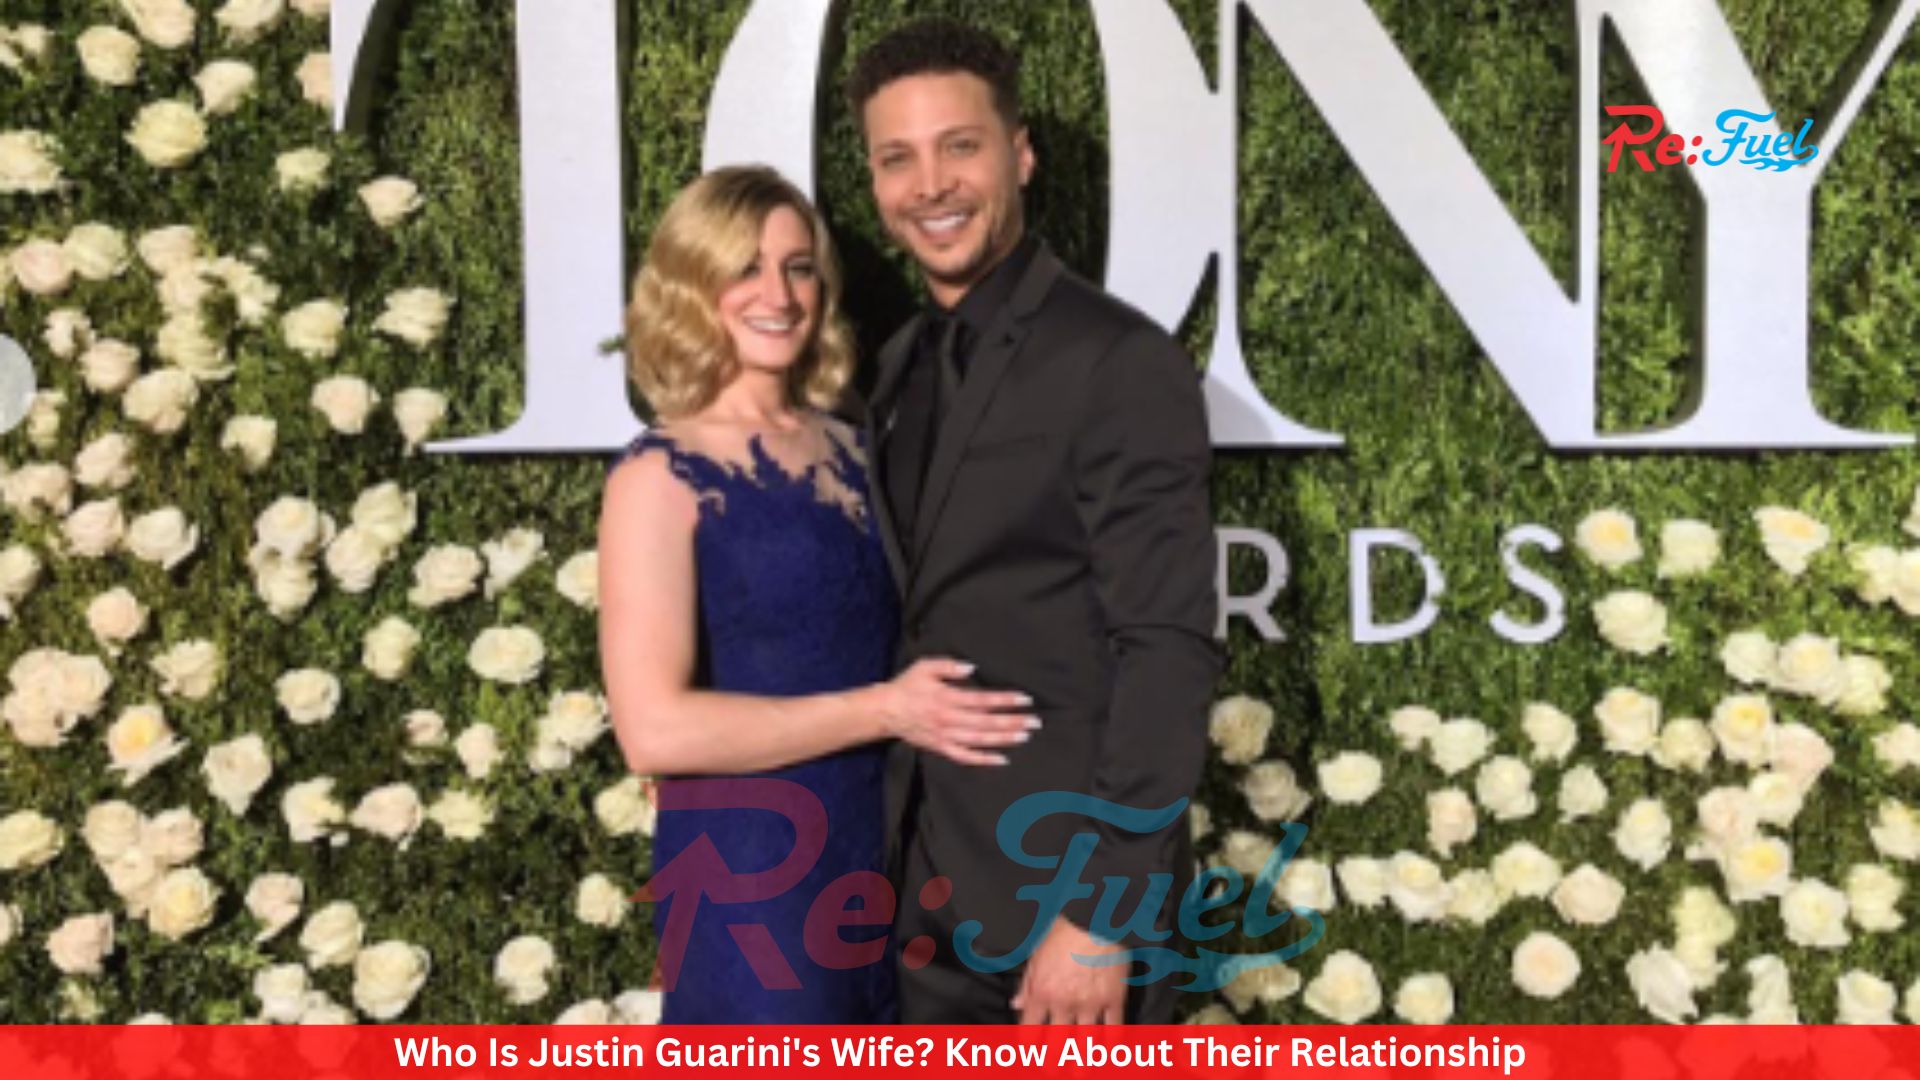 Who Is Justin Guarini's Wife? Know About Their Relationship